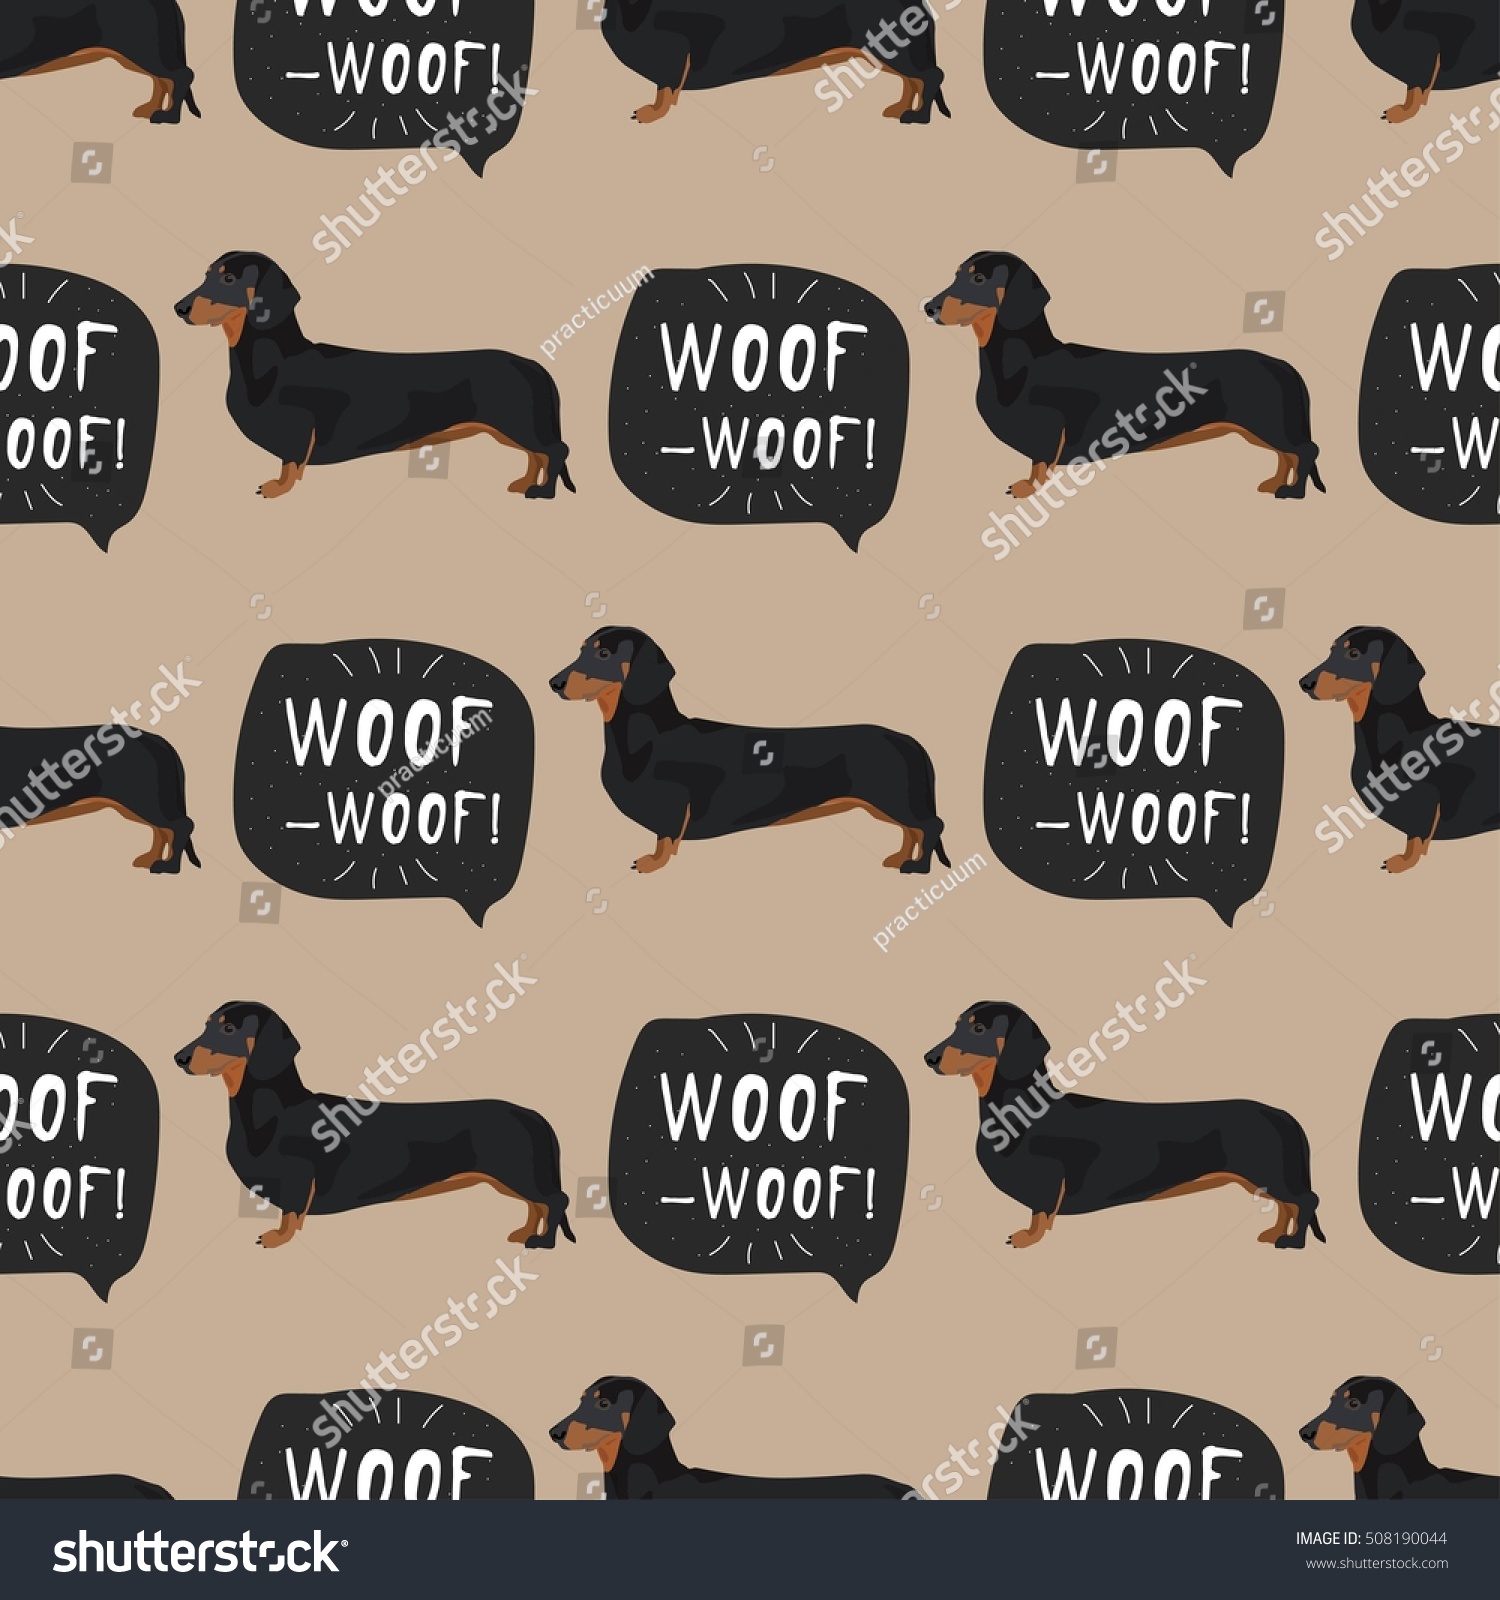 SVG of Dachshund dog seamless pattern colorful background with woof banner svg